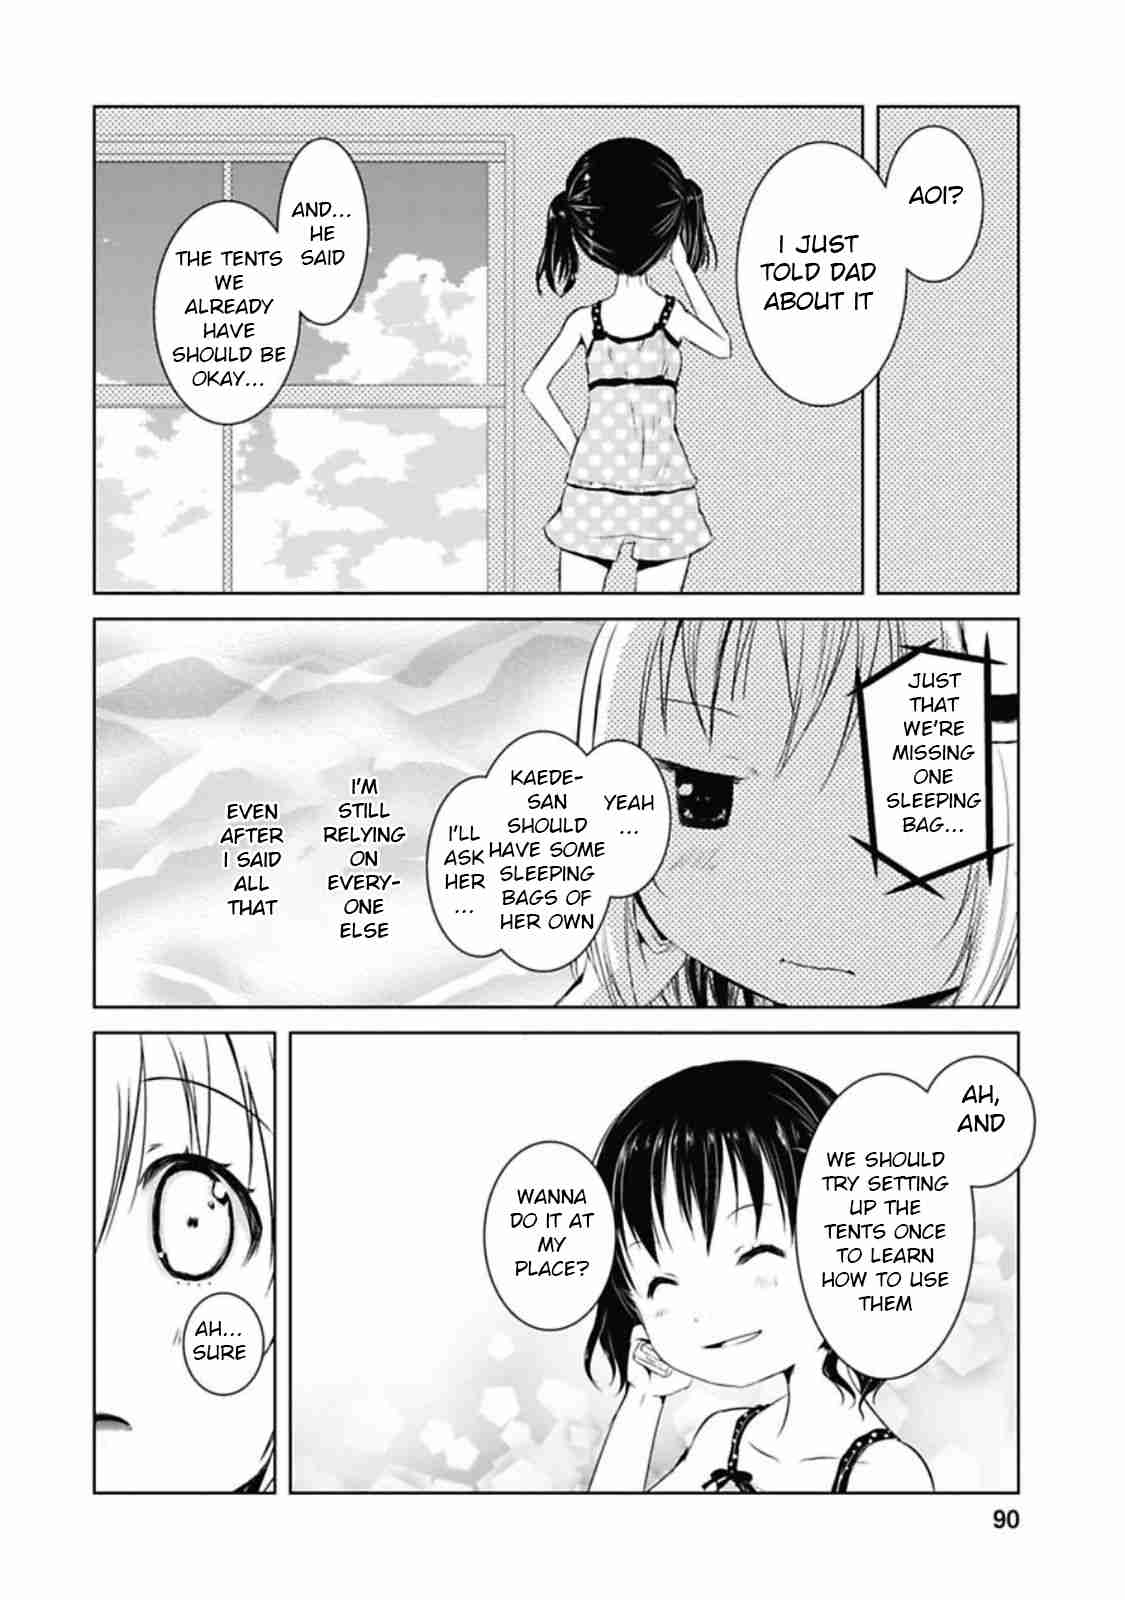 Yama no Susume Vol. 5 Ch. 37 It's Hard Sleeping In Tents...